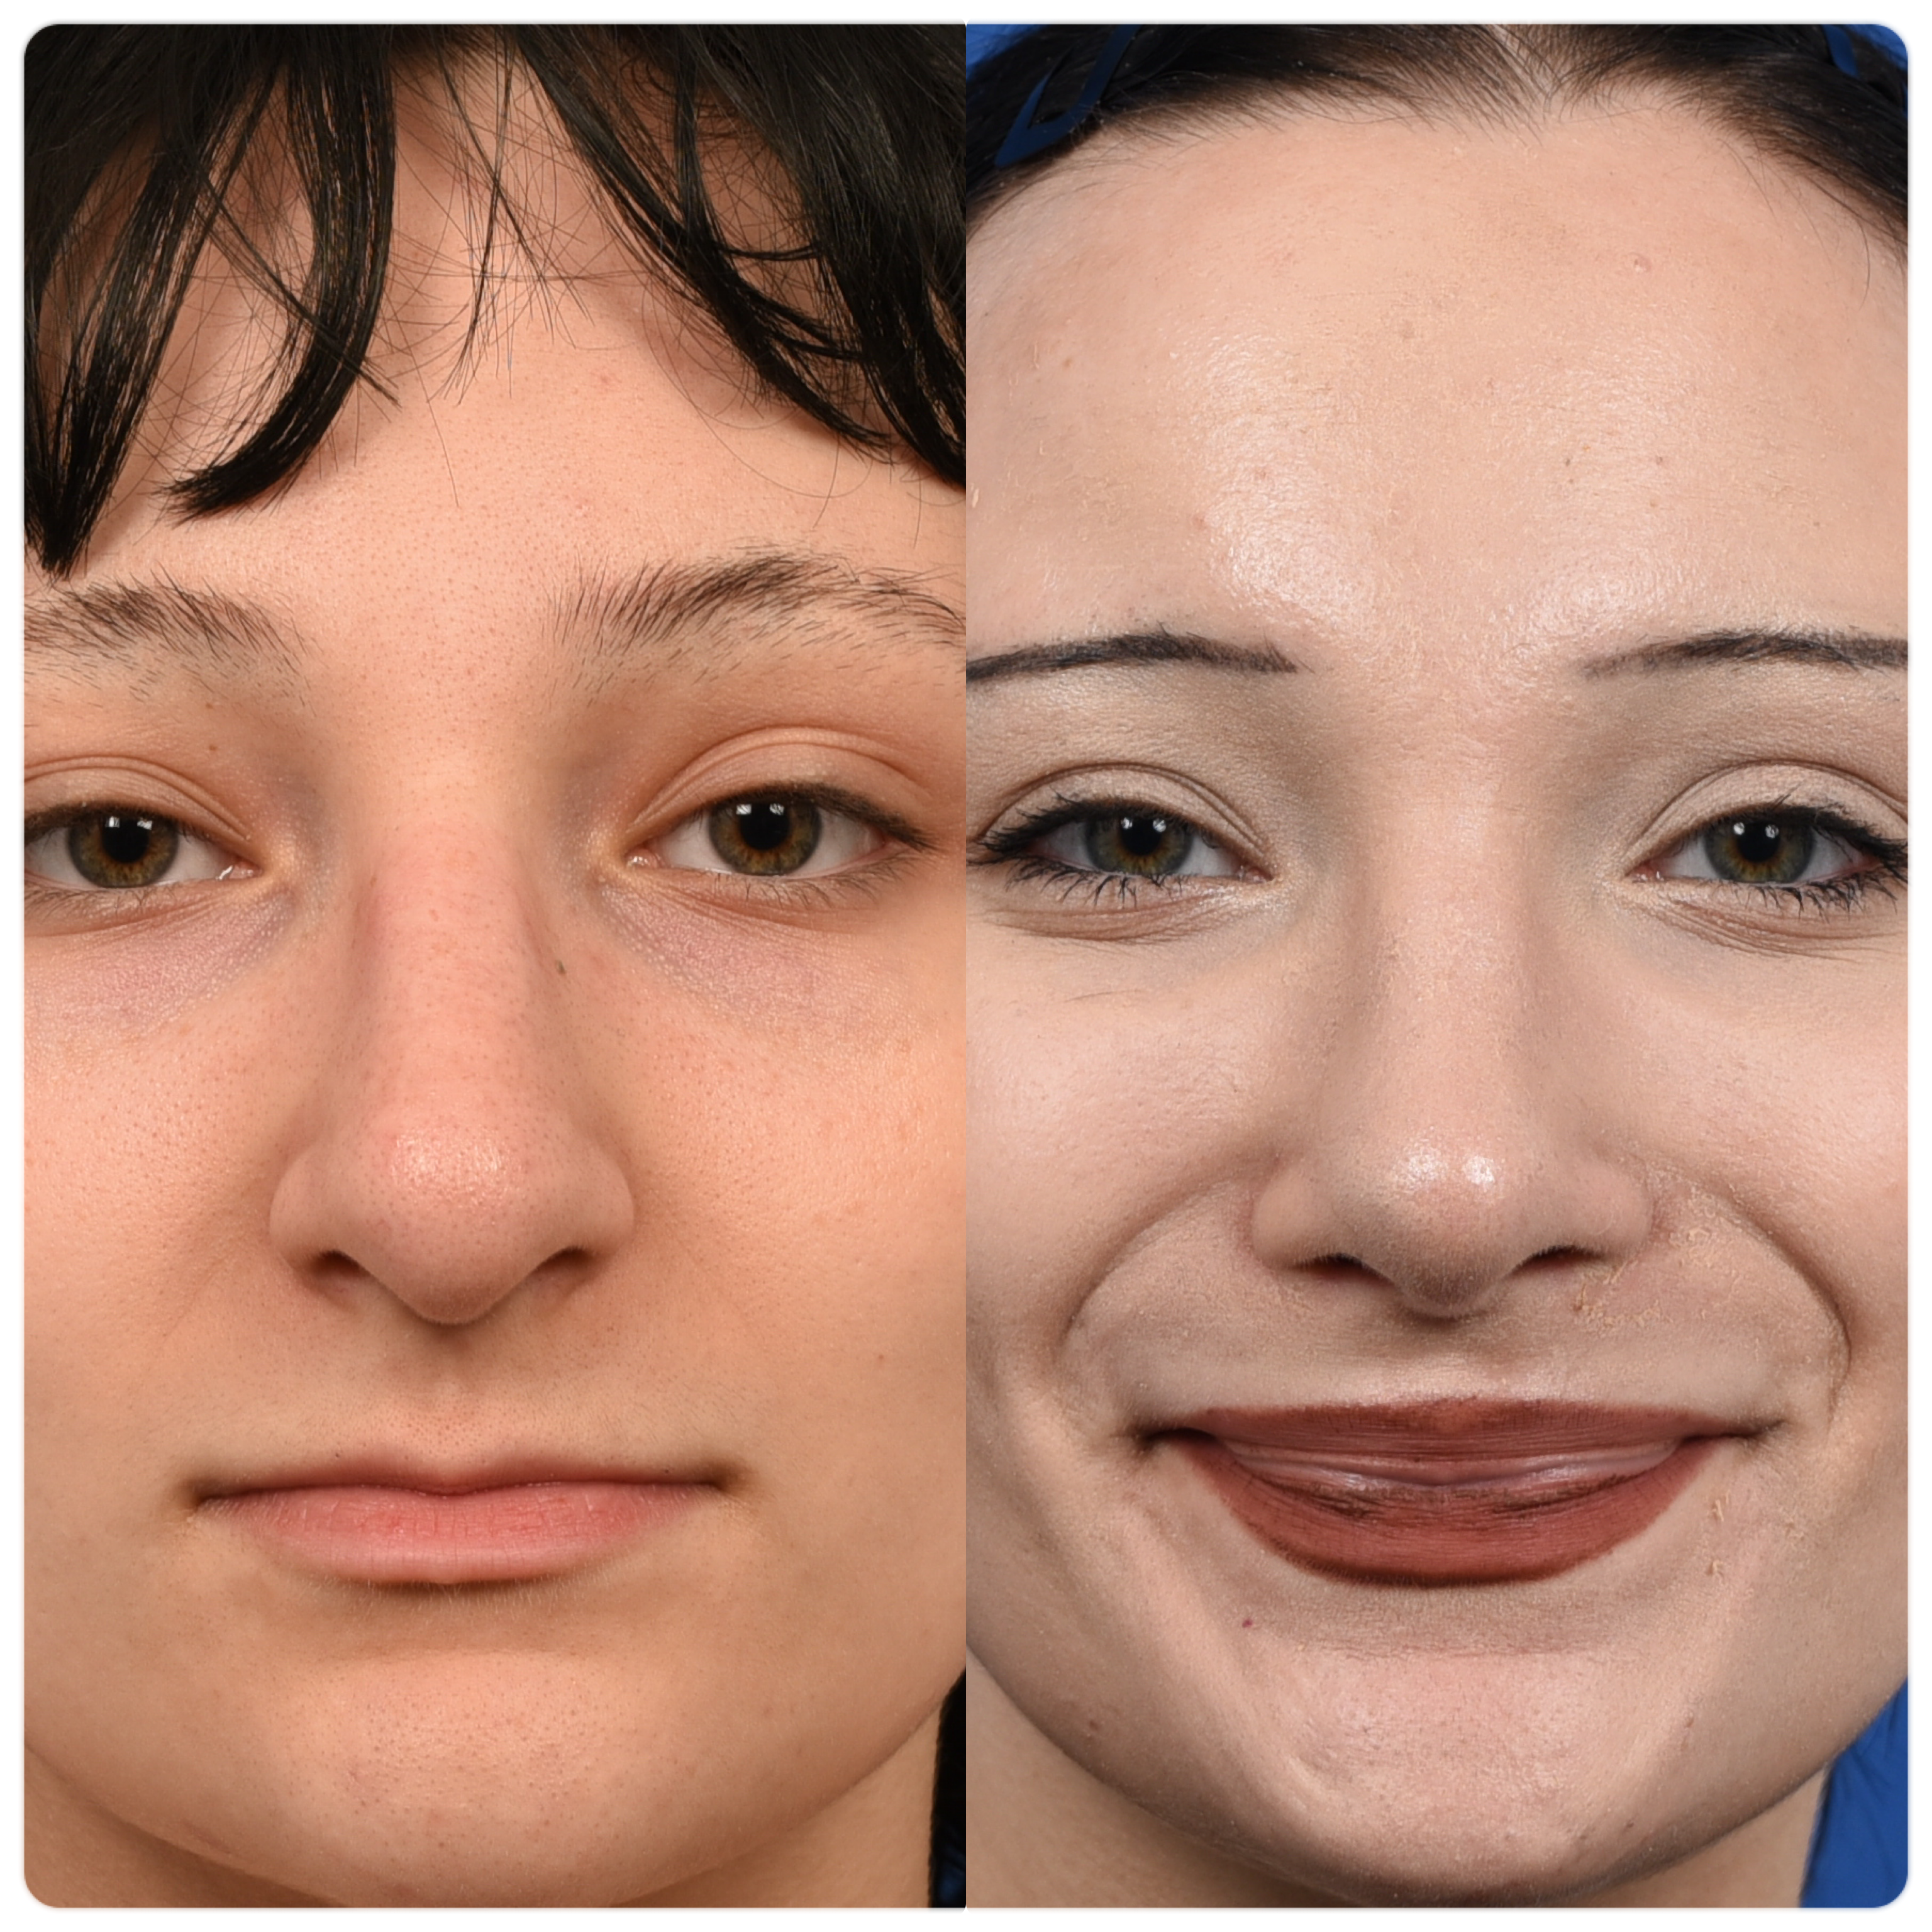 A woman with a rhinoplasty before and after pictures. Nose job transformation photos.